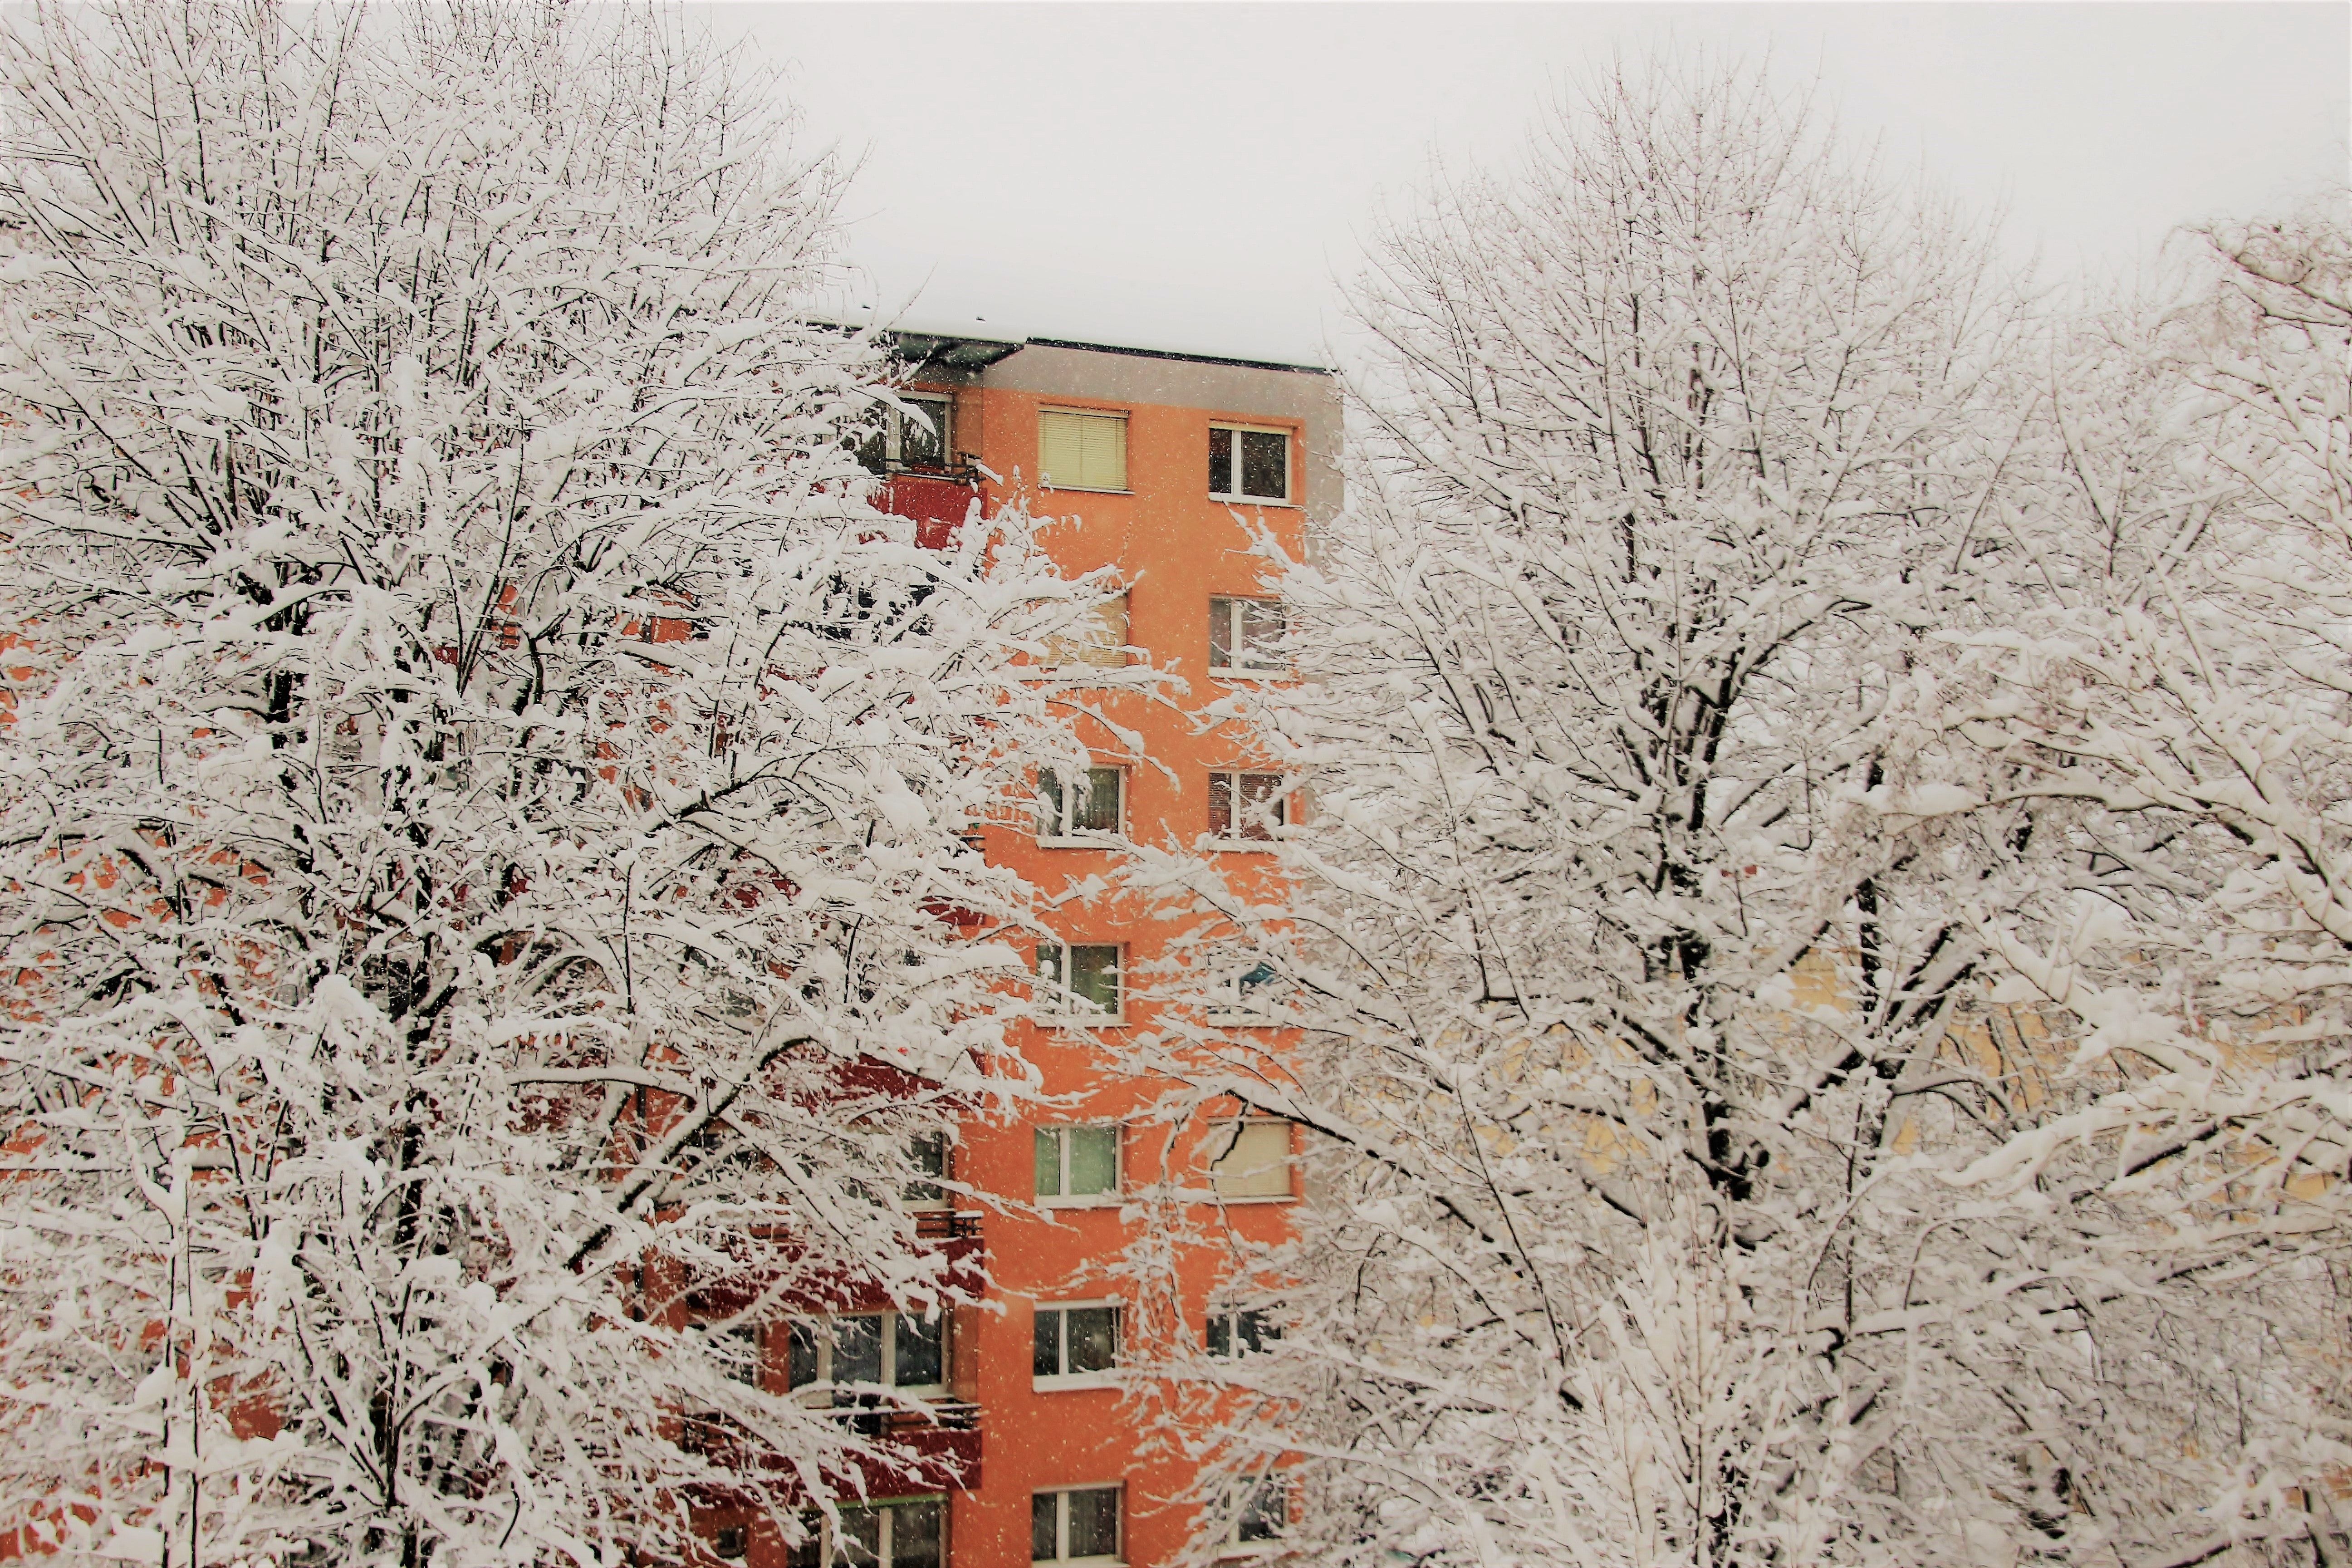 Photo of an apartment and snow-covered trees